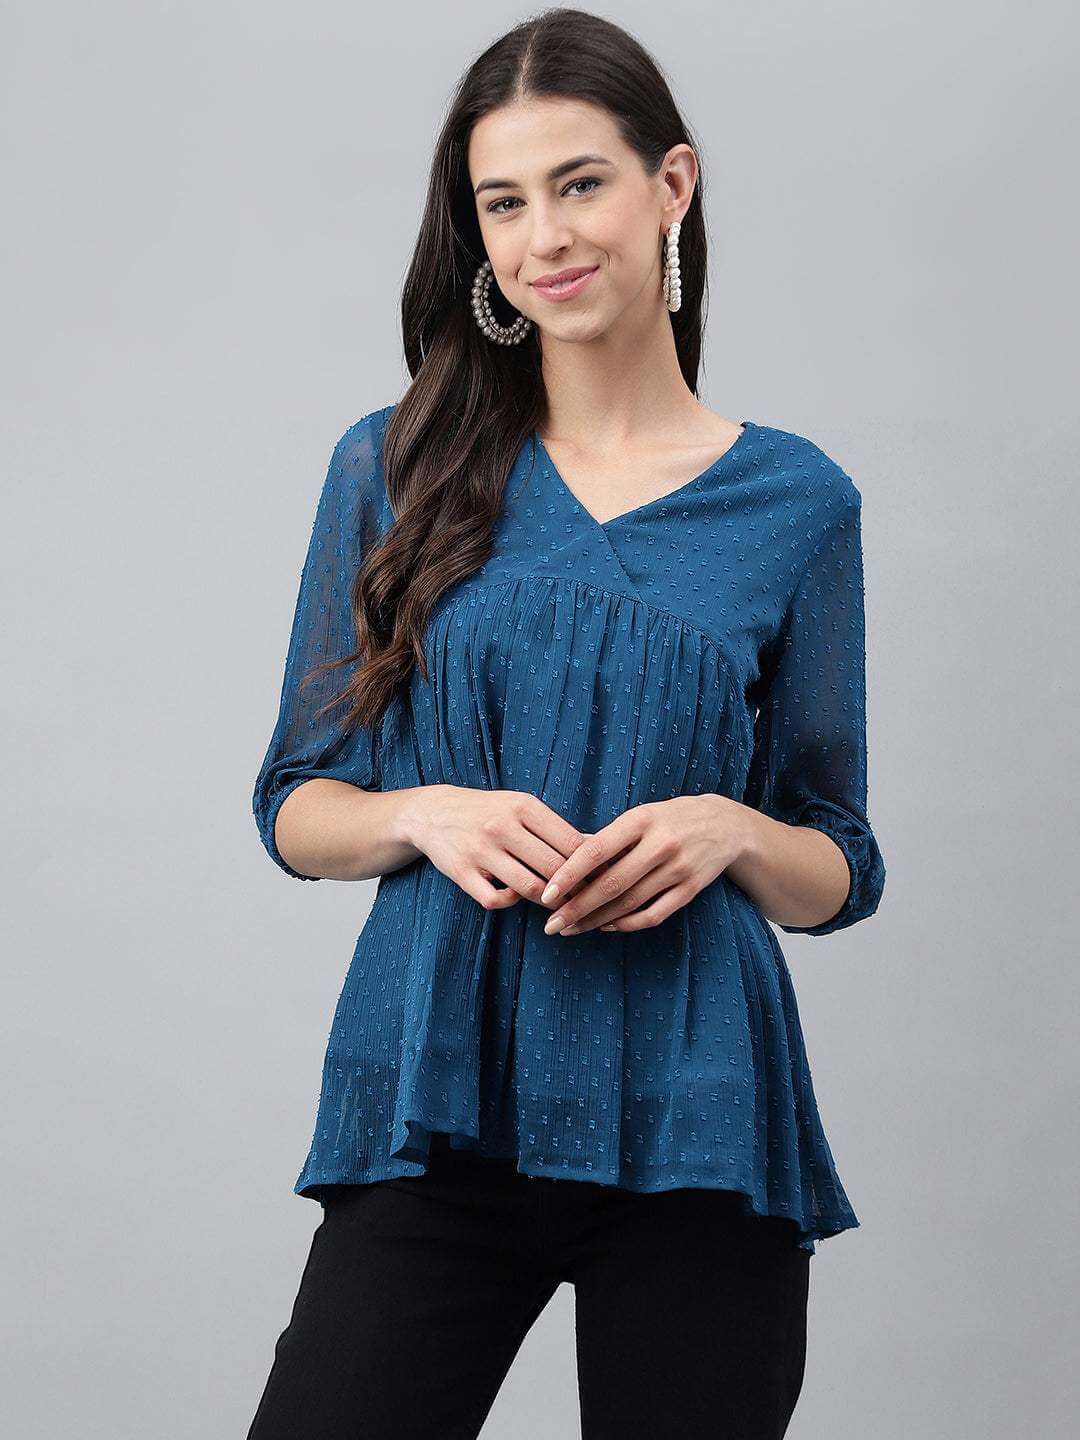 Teal Blue Dobby Chiffon Solid Empire Top